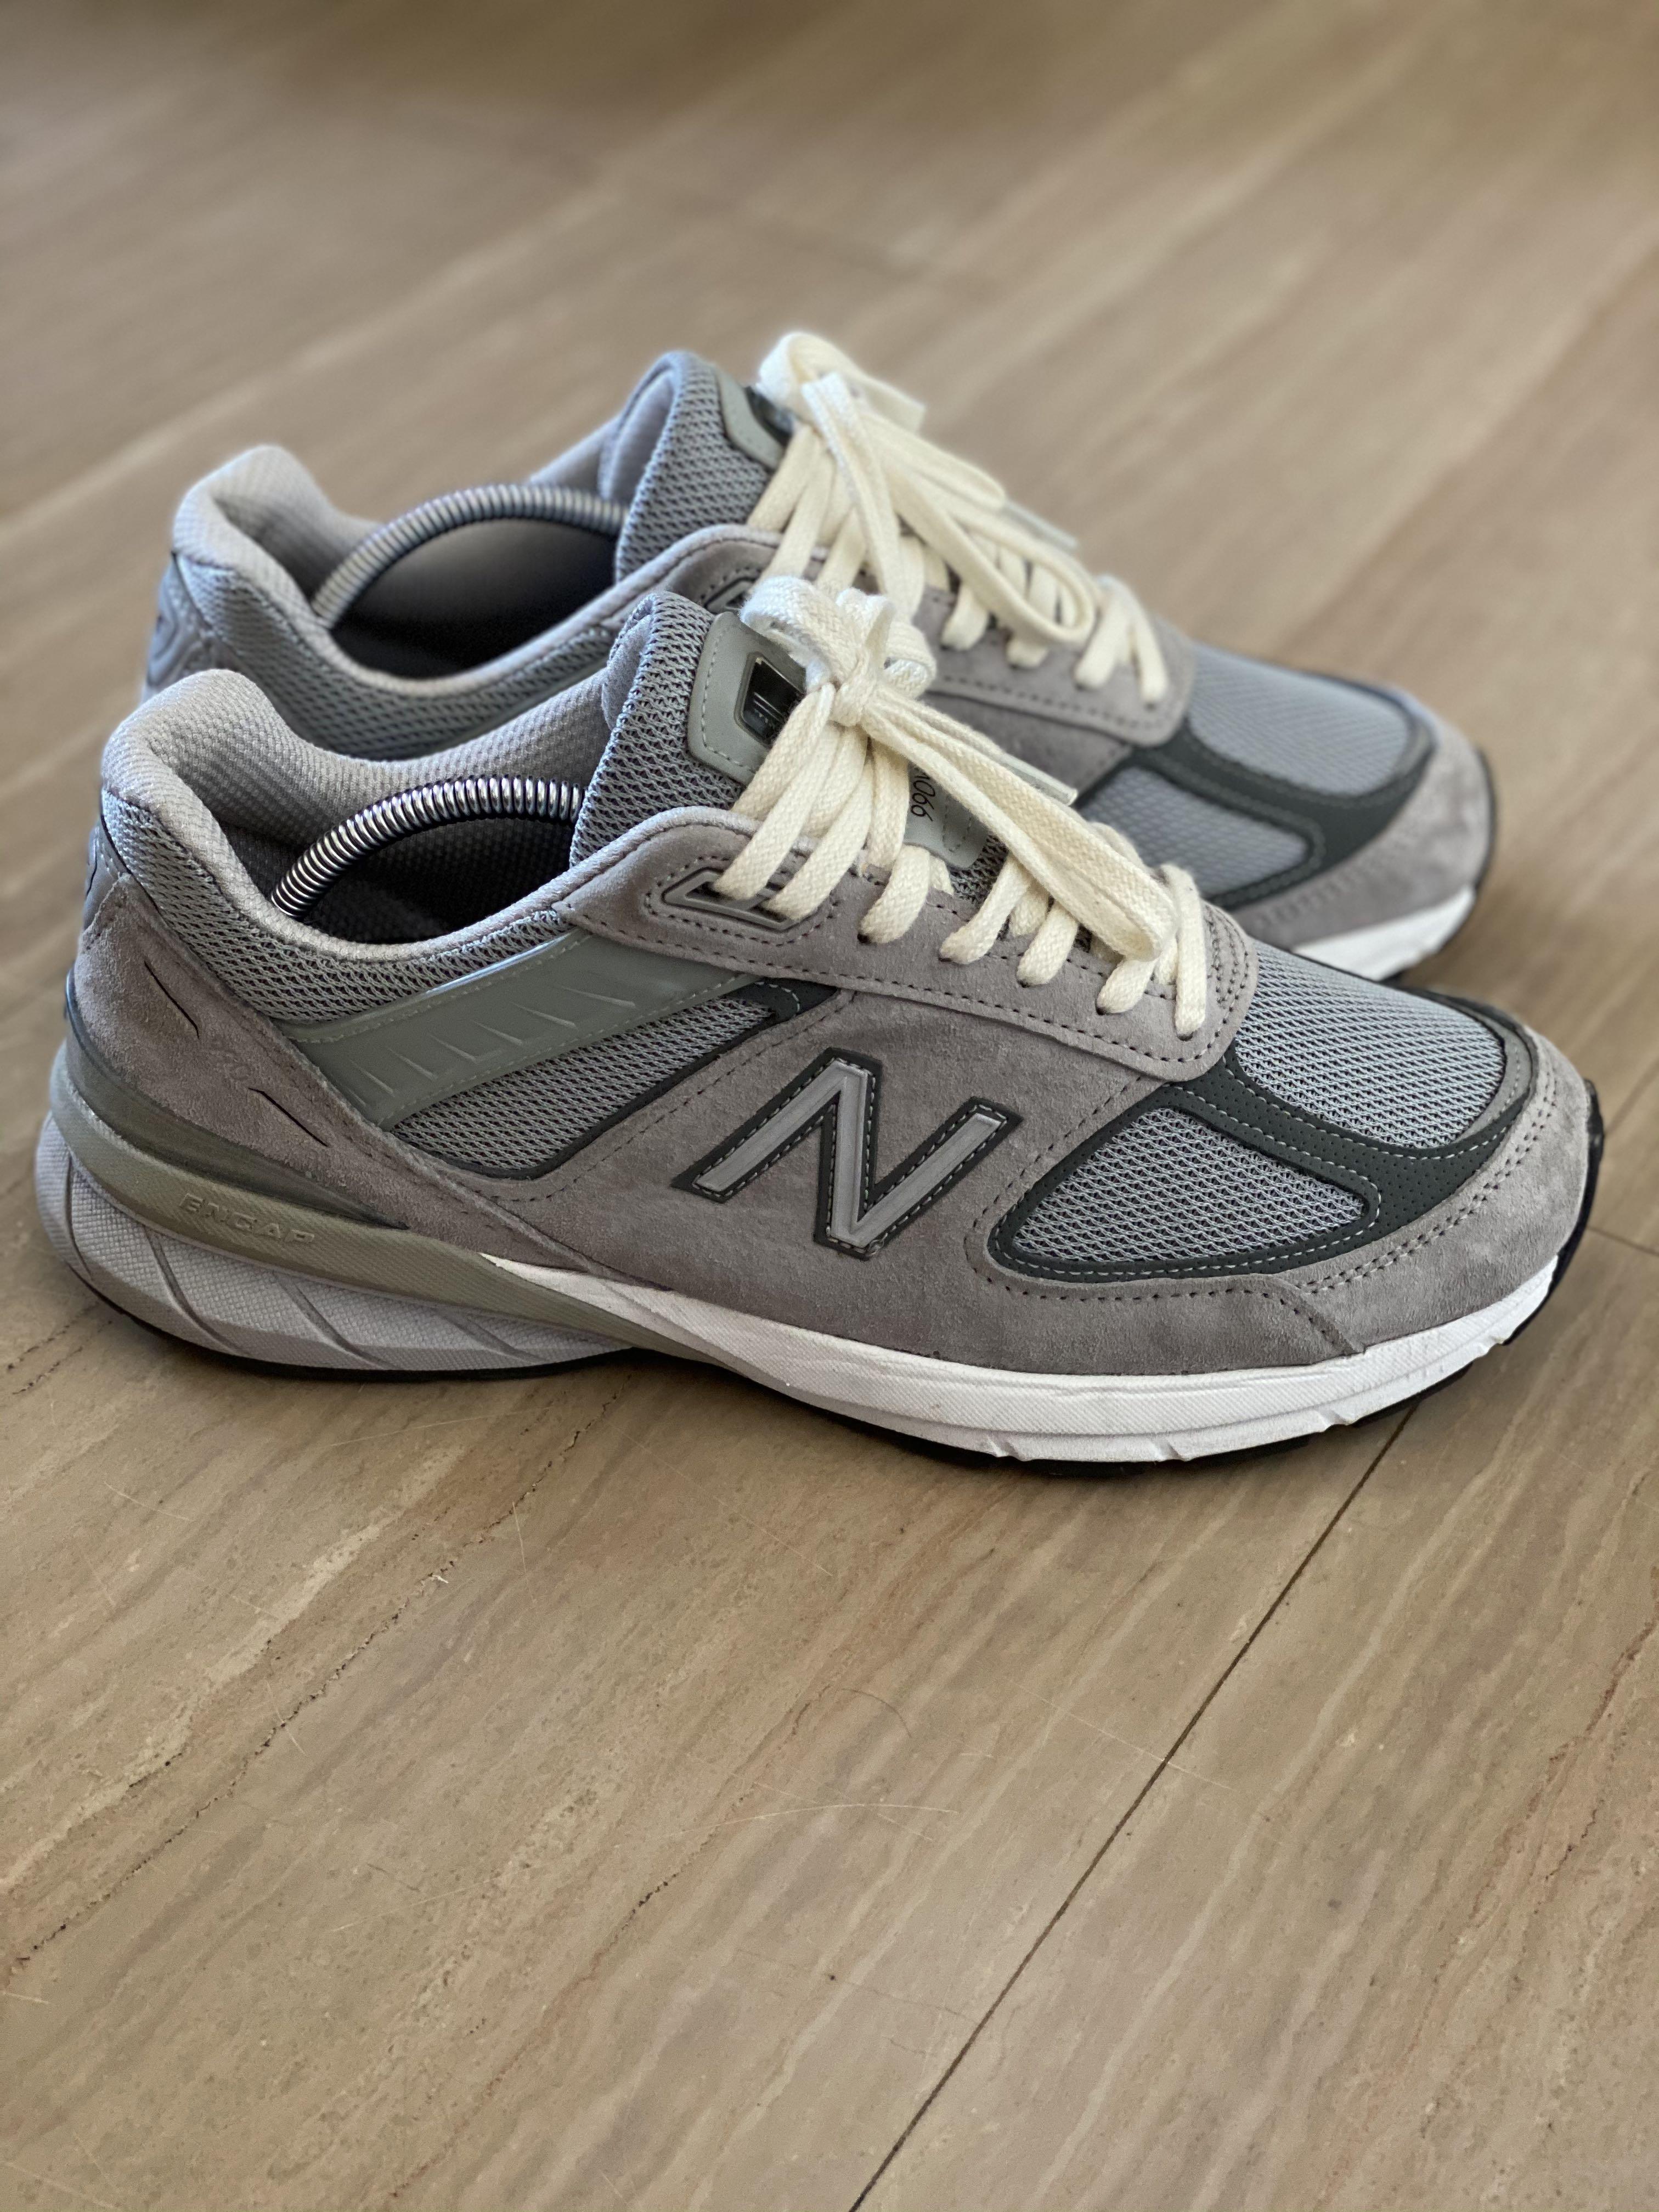 Sail shoelaces for new balance 990 v5 